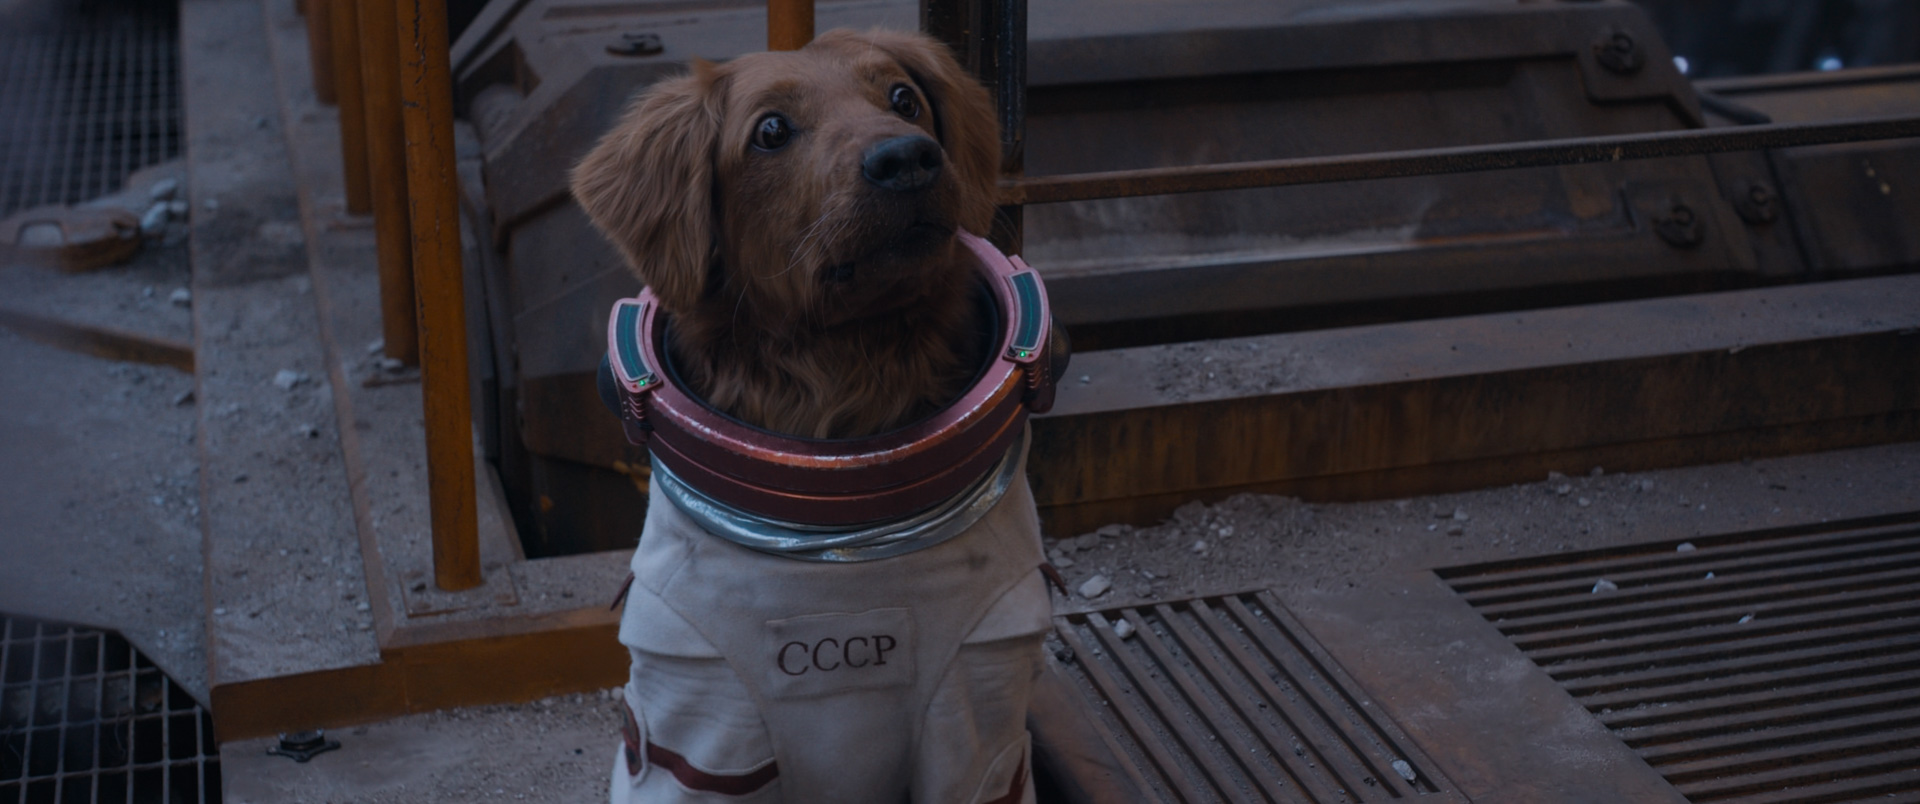 An image of Cosmo the space dog in Guardians of the Galaxy Vol. 3. She sits and looks up eagerly, wearing her white CCCP spacesuit. She has fluffy ears, red fur, and a long snout.